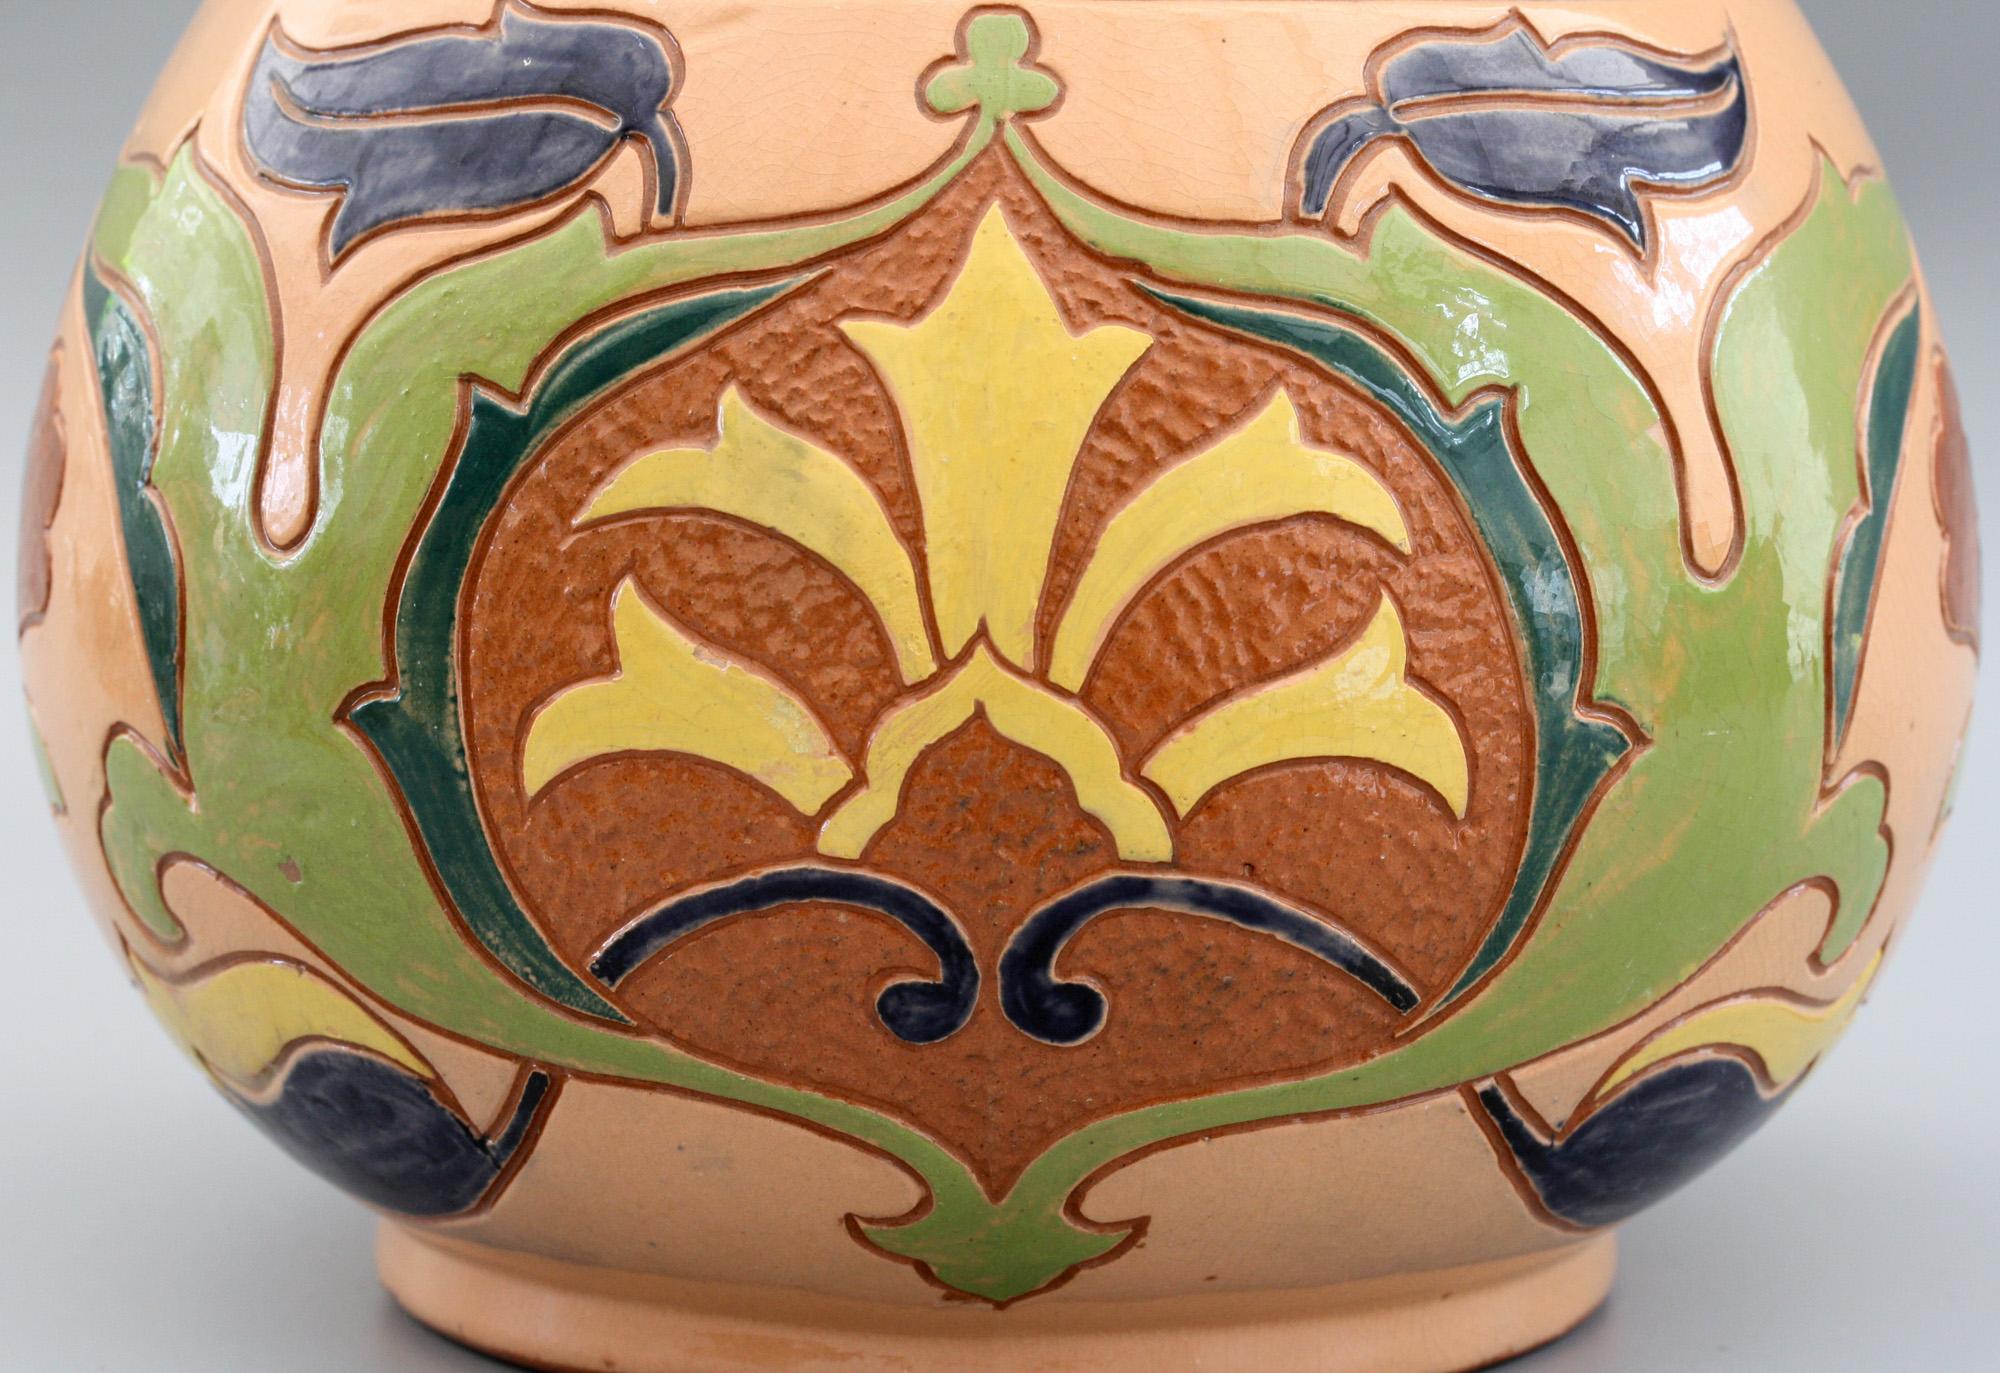 A fine Art Nouveau Salopian Rhodian Iznik pattern art pottery vase made at the Benthall Pottery Company around 1895. The red earthenware vase has a Middle Eastern shape standing on a narrow rounded foot with a rounded bulbous lower body tapering